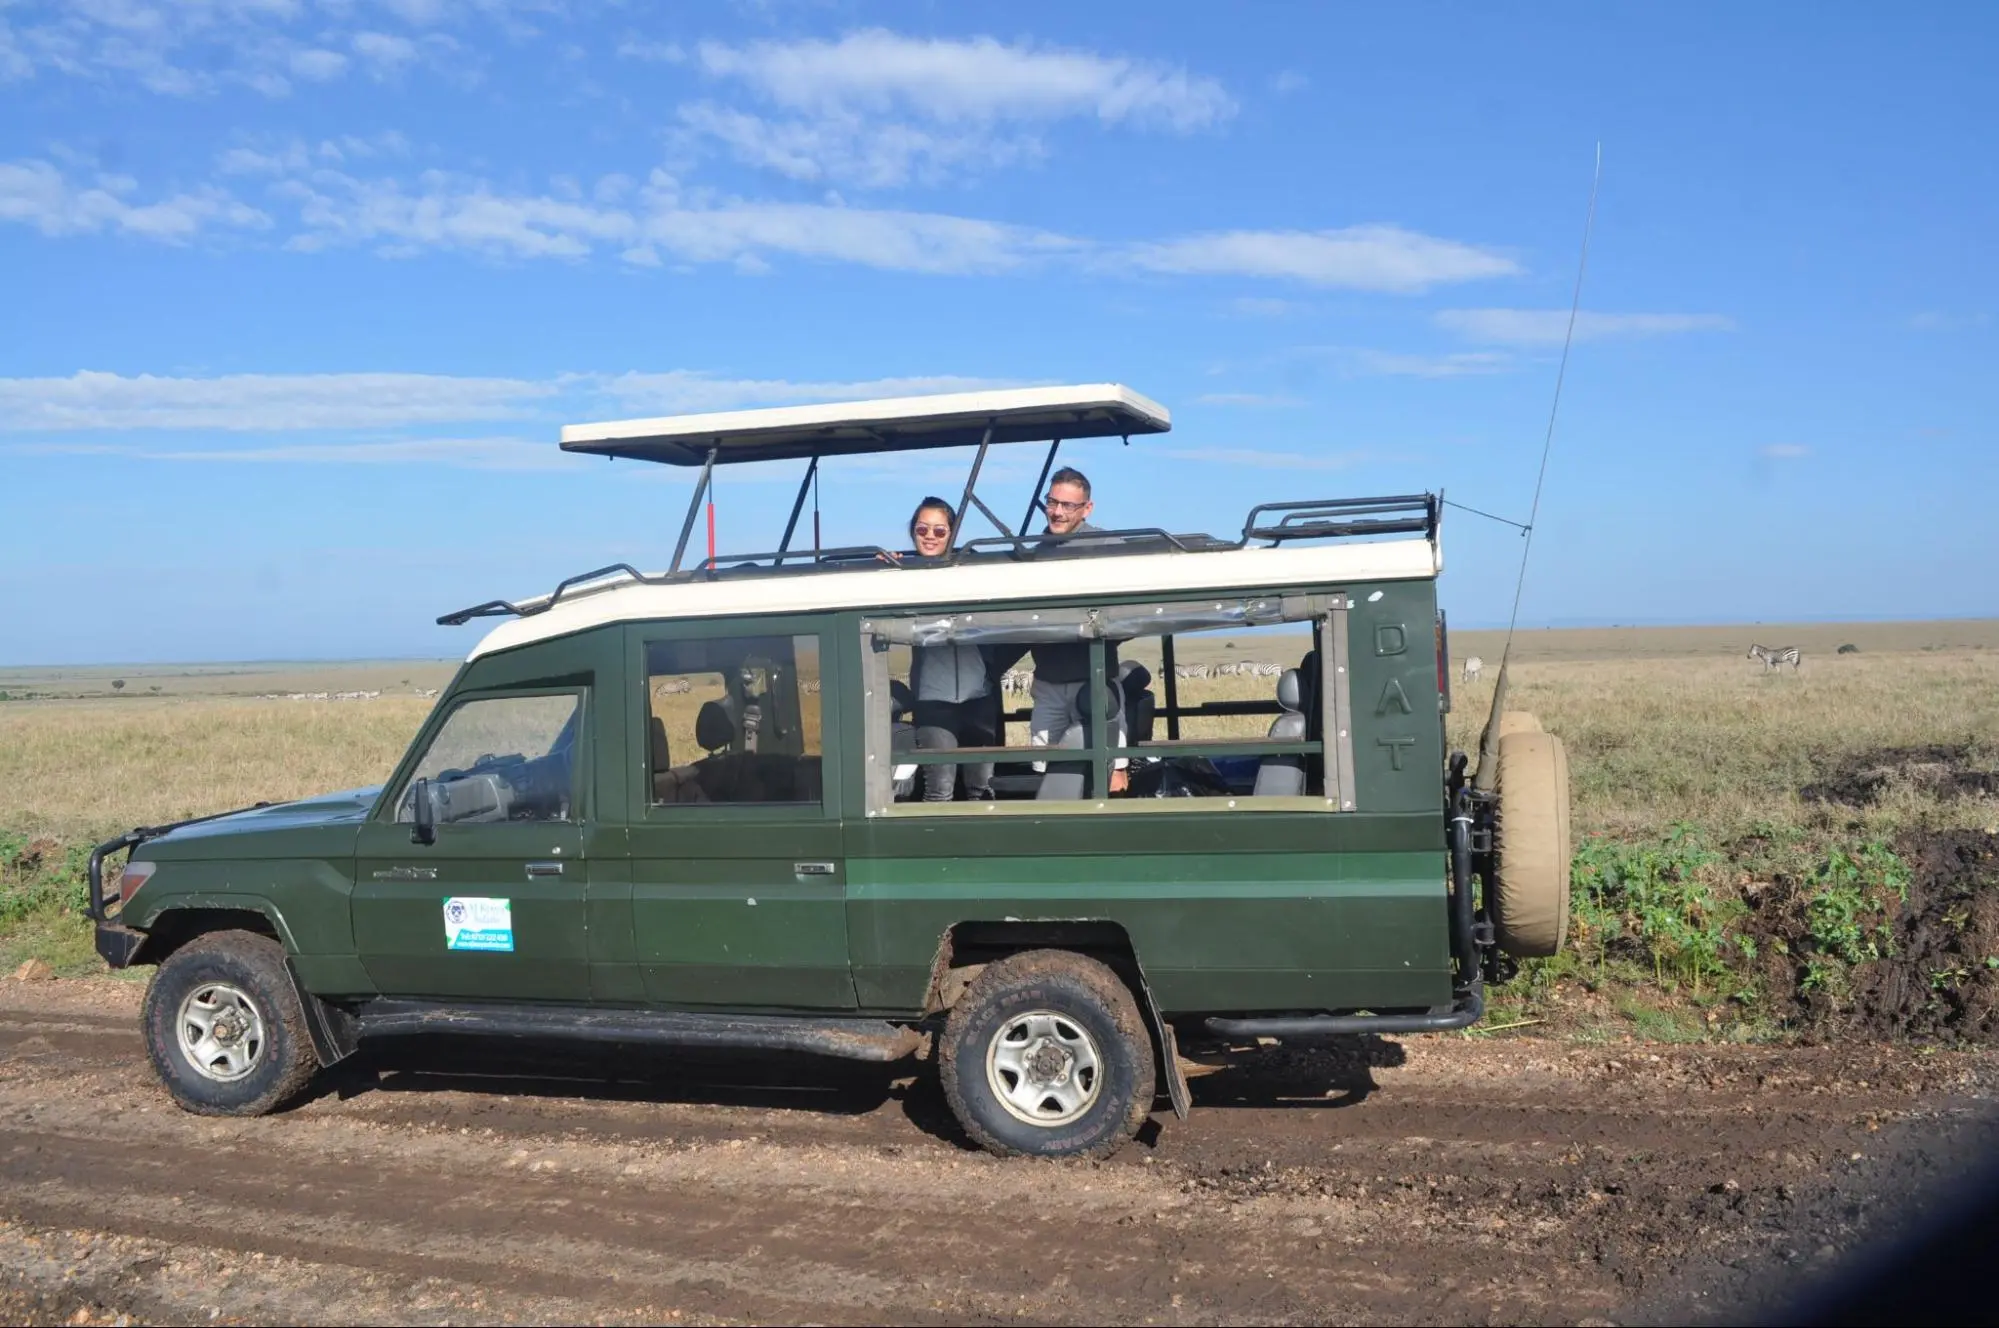 A safari vehicle suitable for holidays to Kenya safari with an open roof and sturdy wheels.